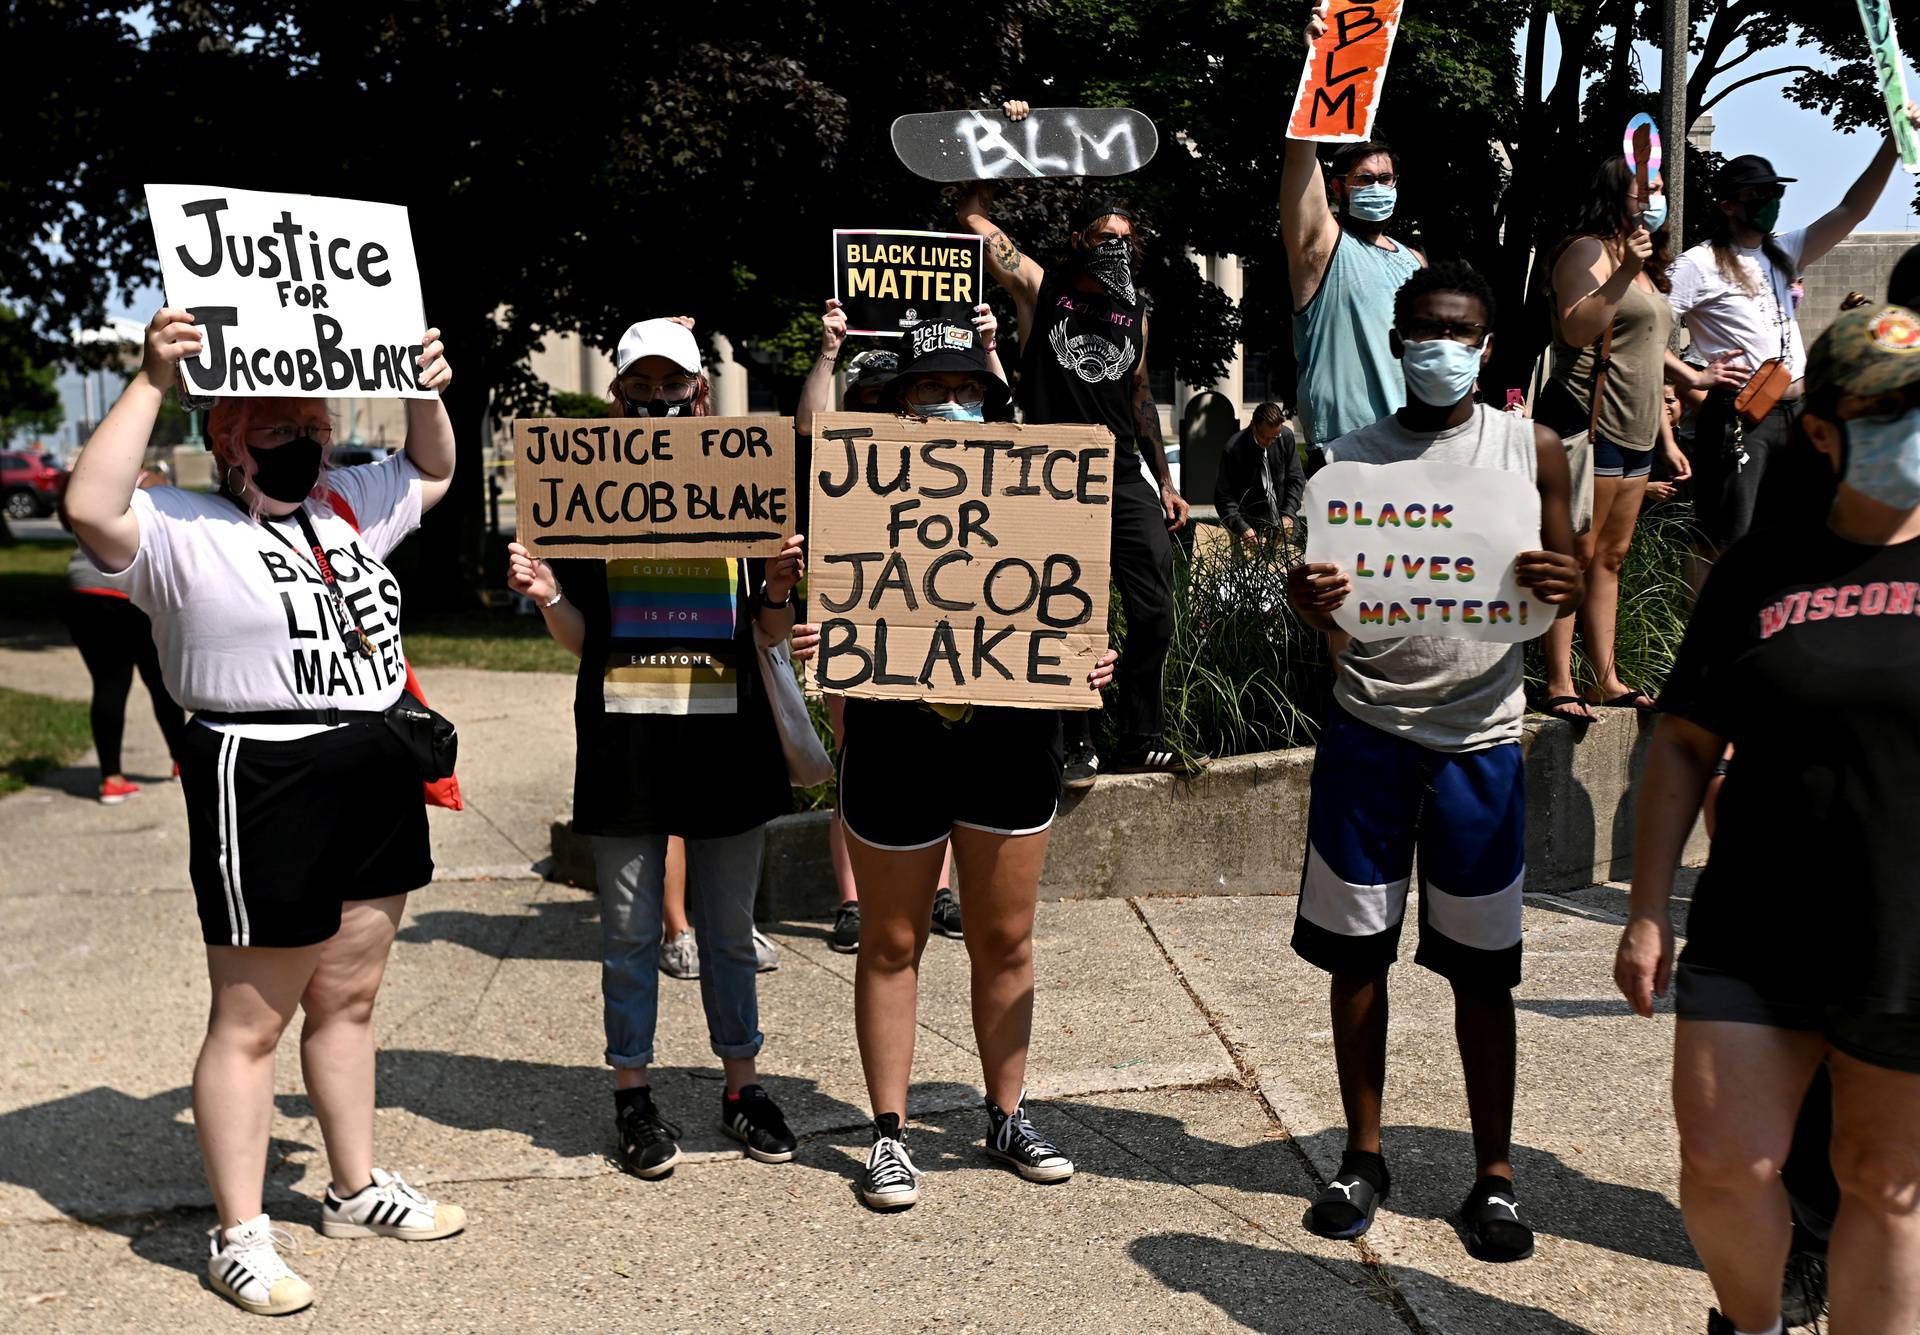 People protest after a Black man identified as Jacob Blake was shot several times by police in Kenosha